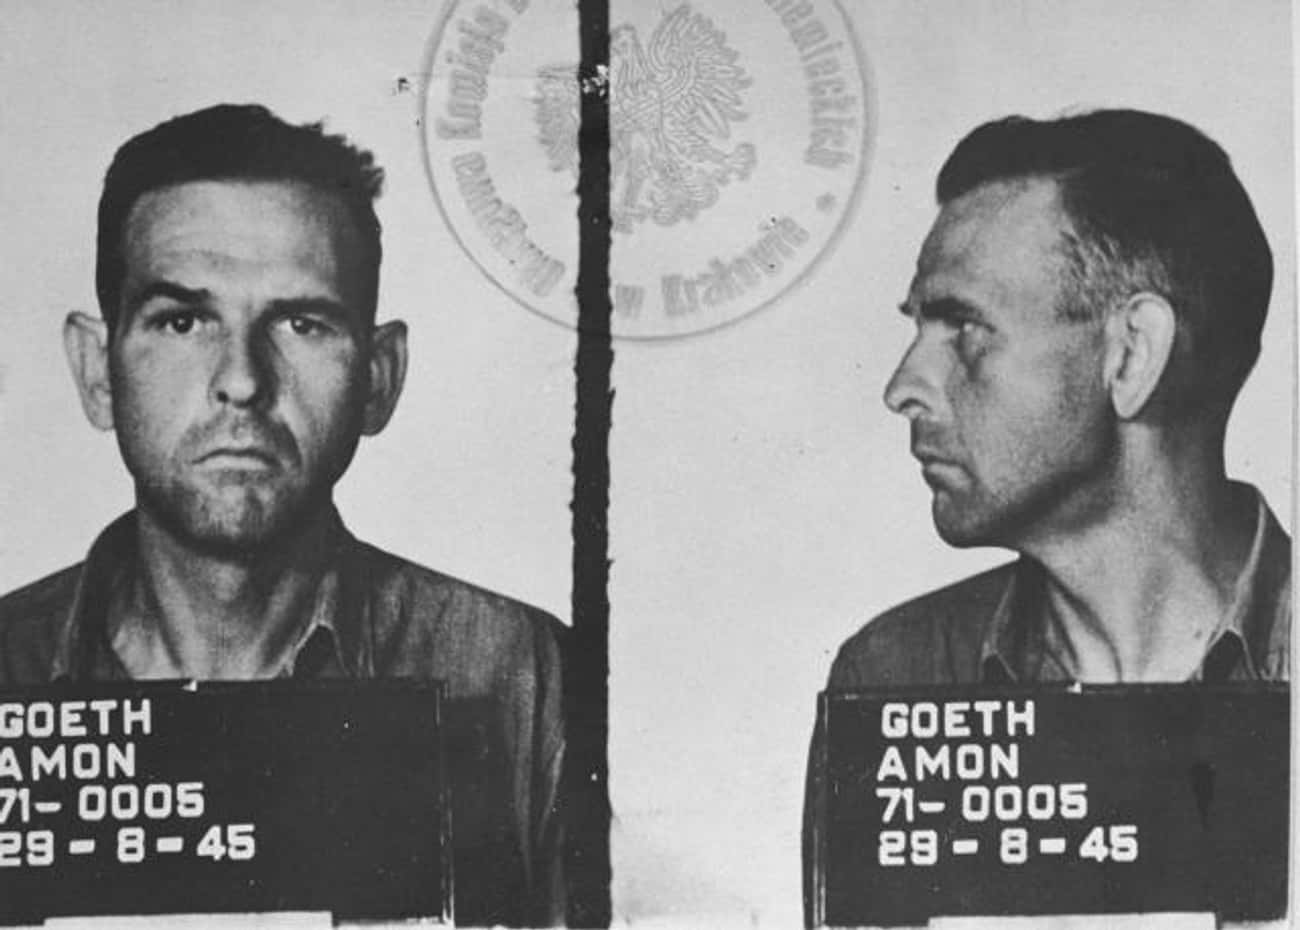 Amon Göth Oversaw A Concentration Camp And Was Hanged